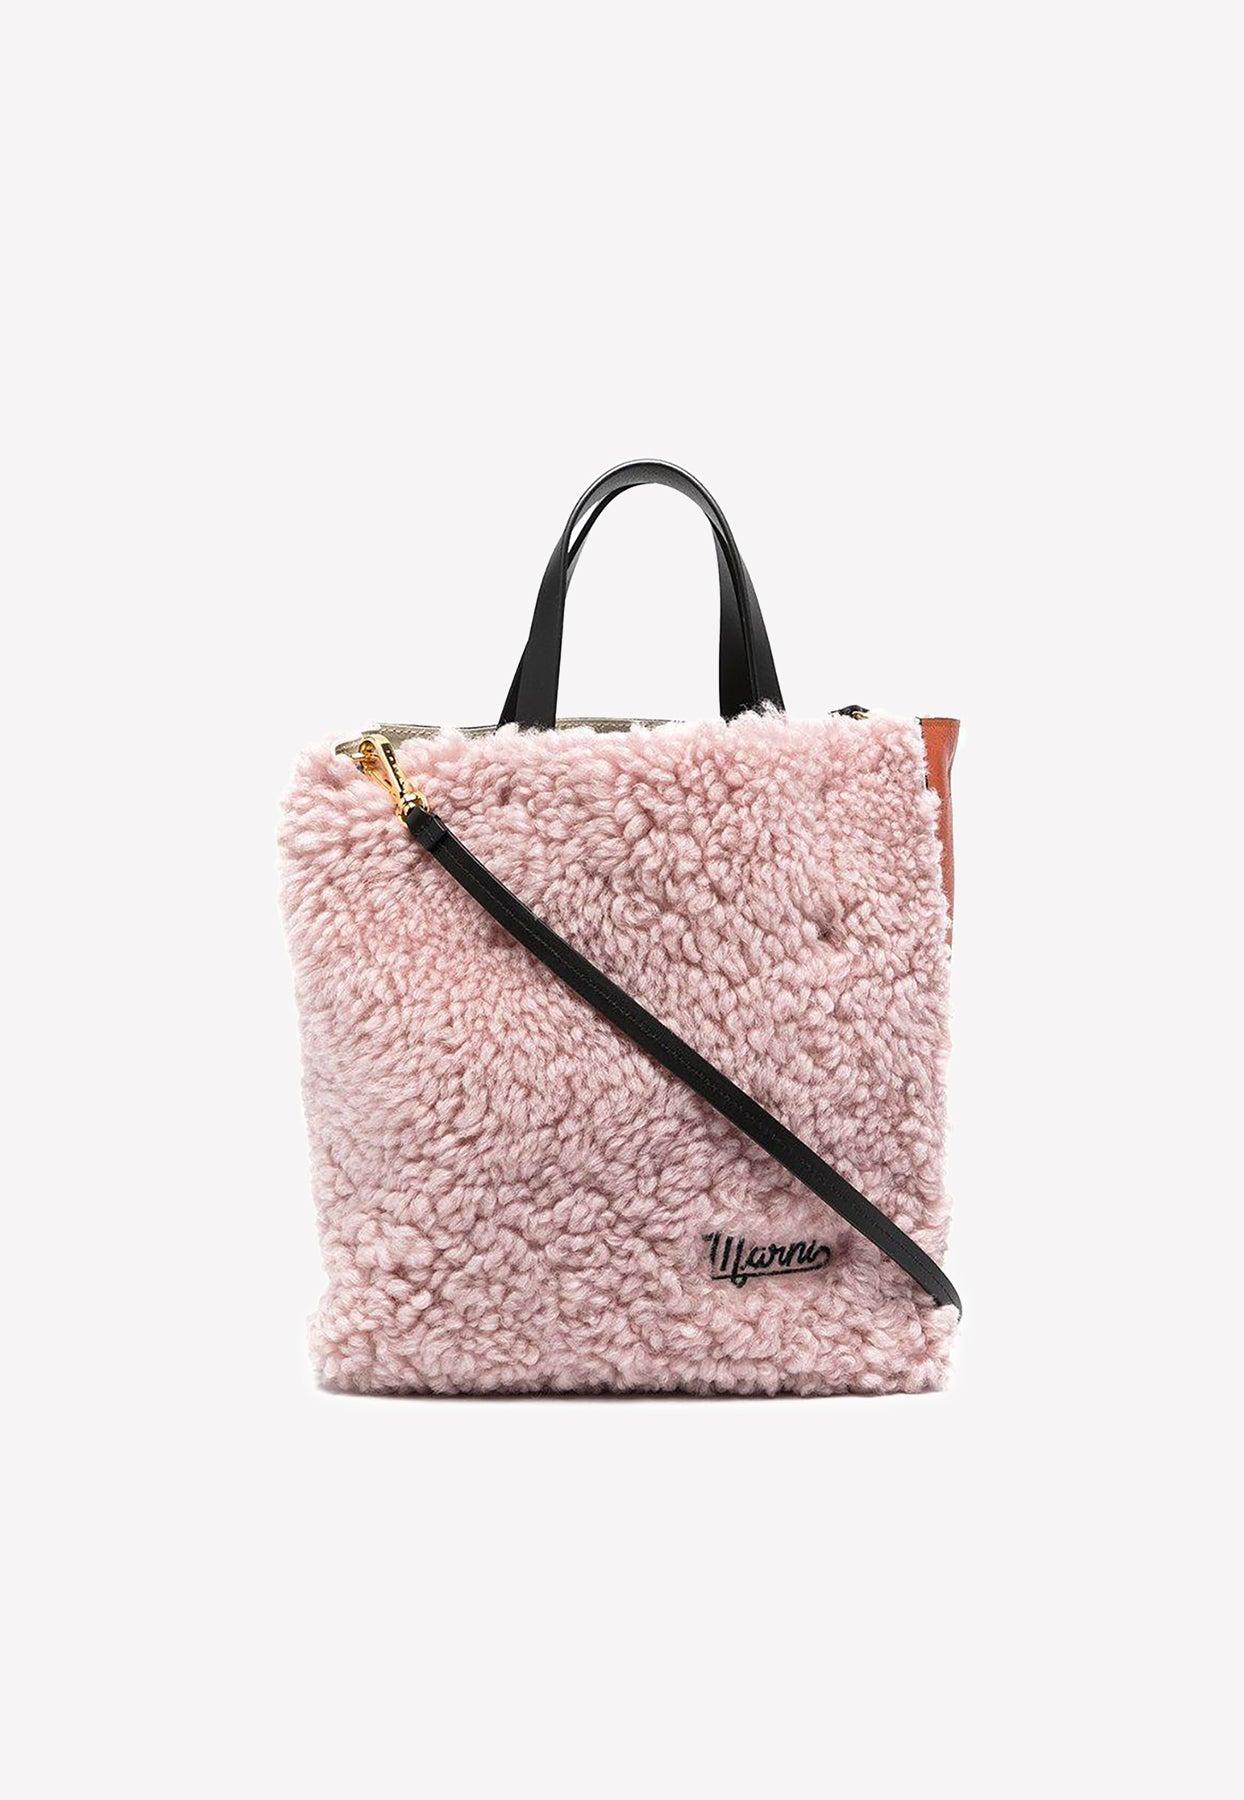 Marni Soft Museo Shearling Tote Bag in Pink | Lyst